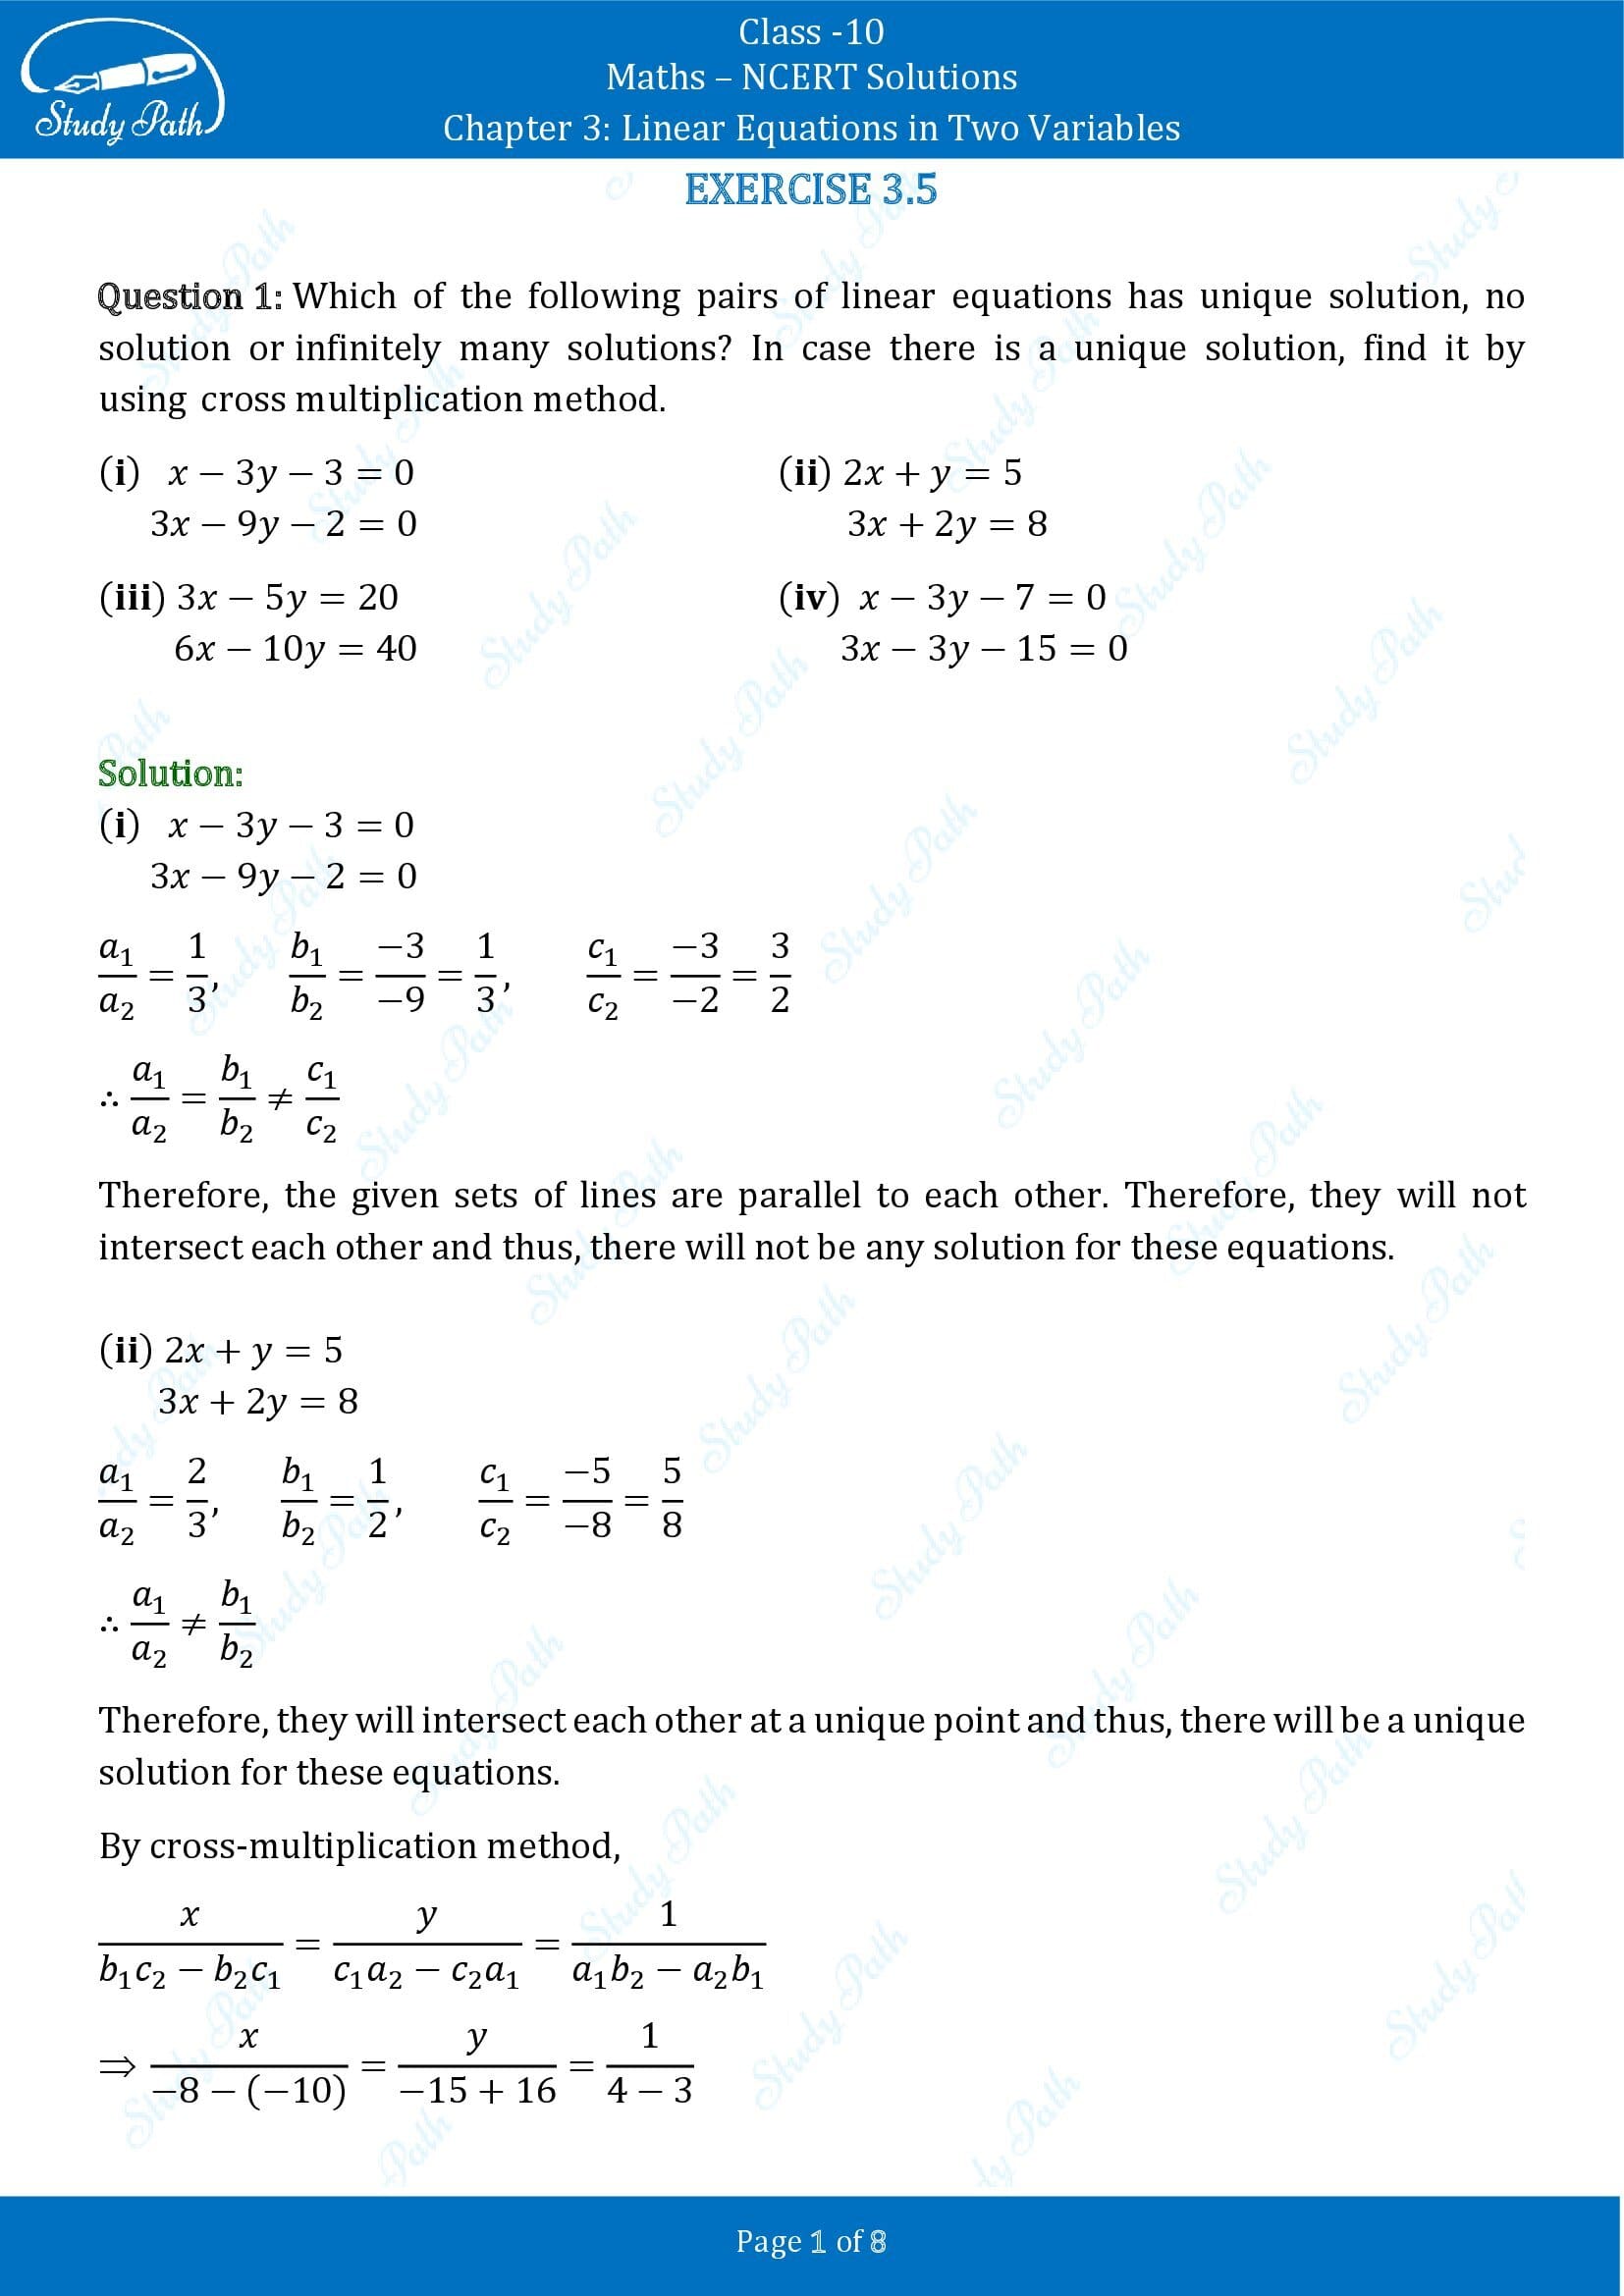 NCERT Solutions for Class 10 Maths Chapter 3 Linear Equations in Two Variables Exercise 3.5 00001